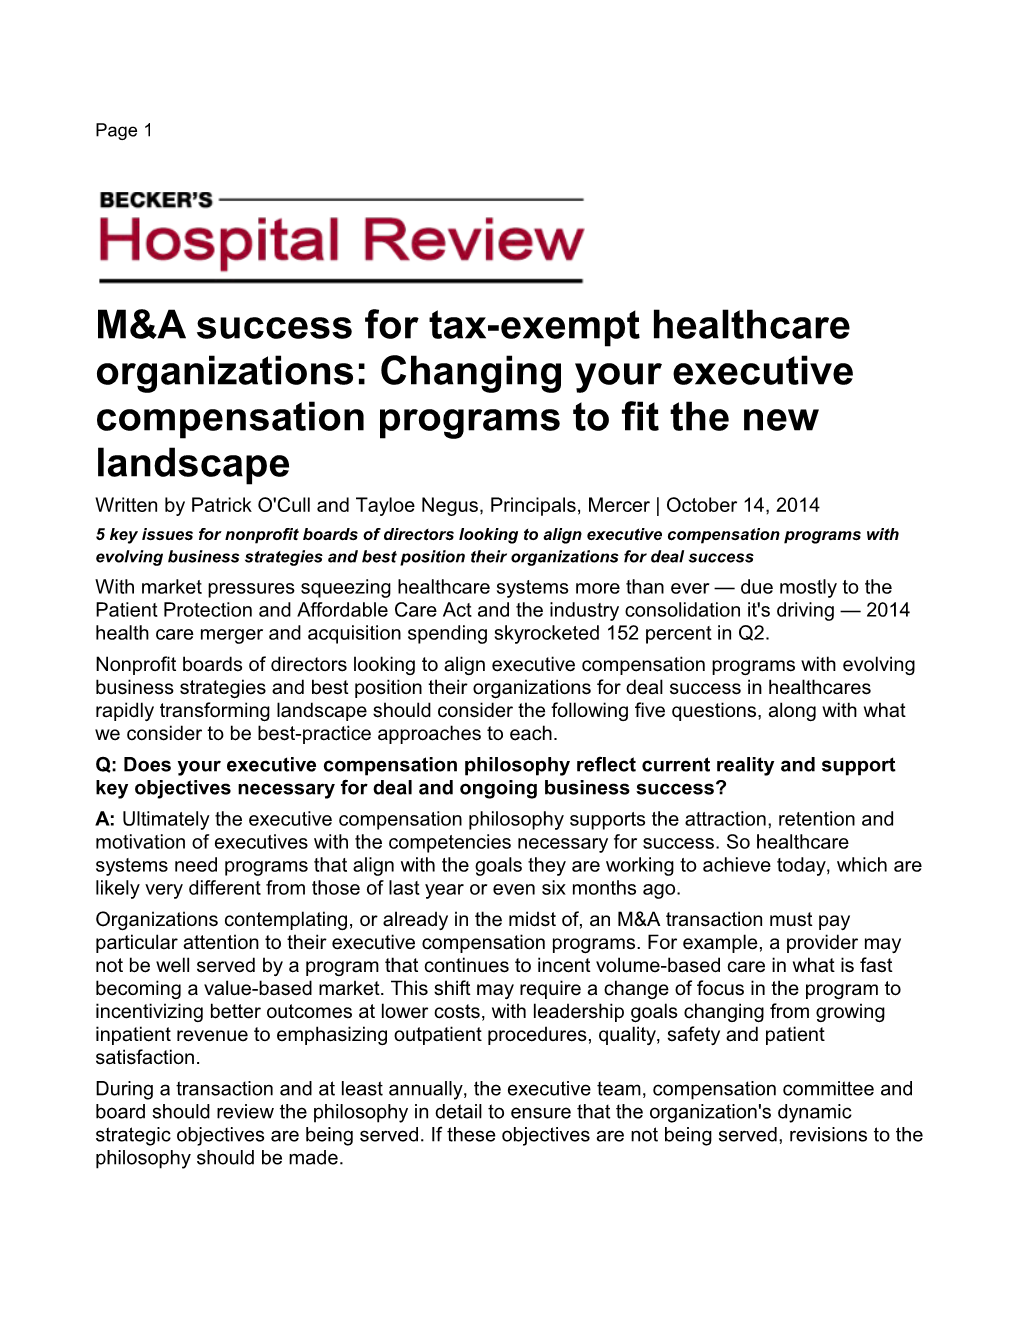 M&A Success for Tax-Exempt Healthcare Organizations: Changing Your Executive Compensation